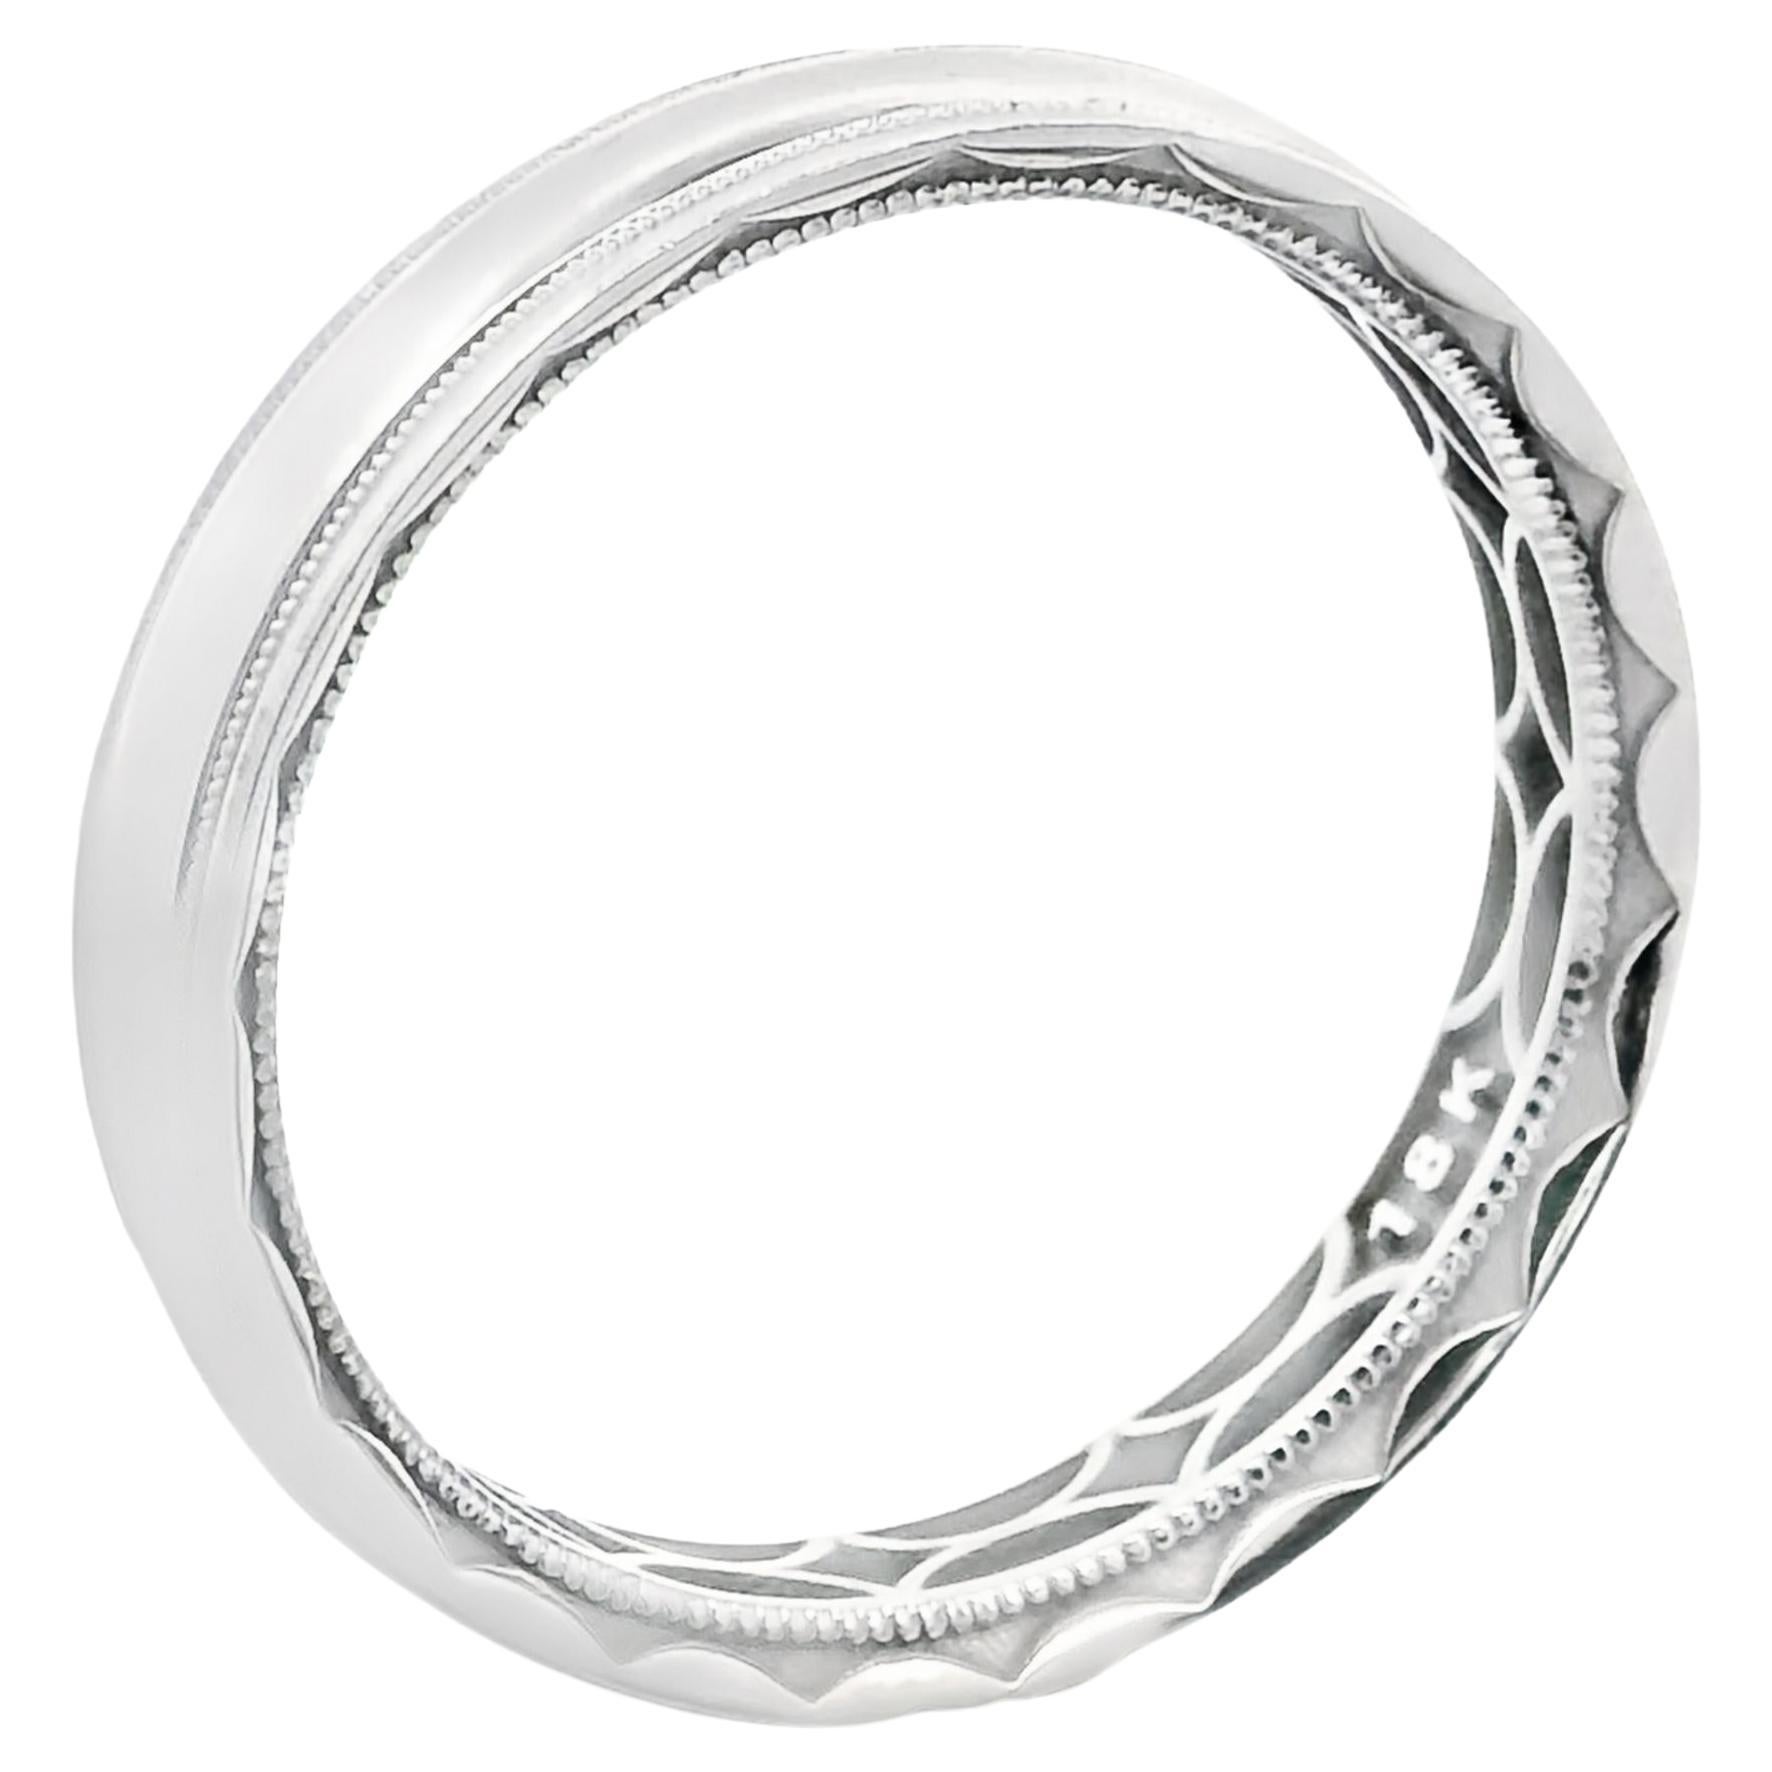 Tacori 106-5W men's wedding band in 18K white gold and 5 millimeters in width.  This ring has a high polish finish and is bordered by beaded rows near the outer edges. Only for your own amusement and joy, hidden along the inside of the ring is